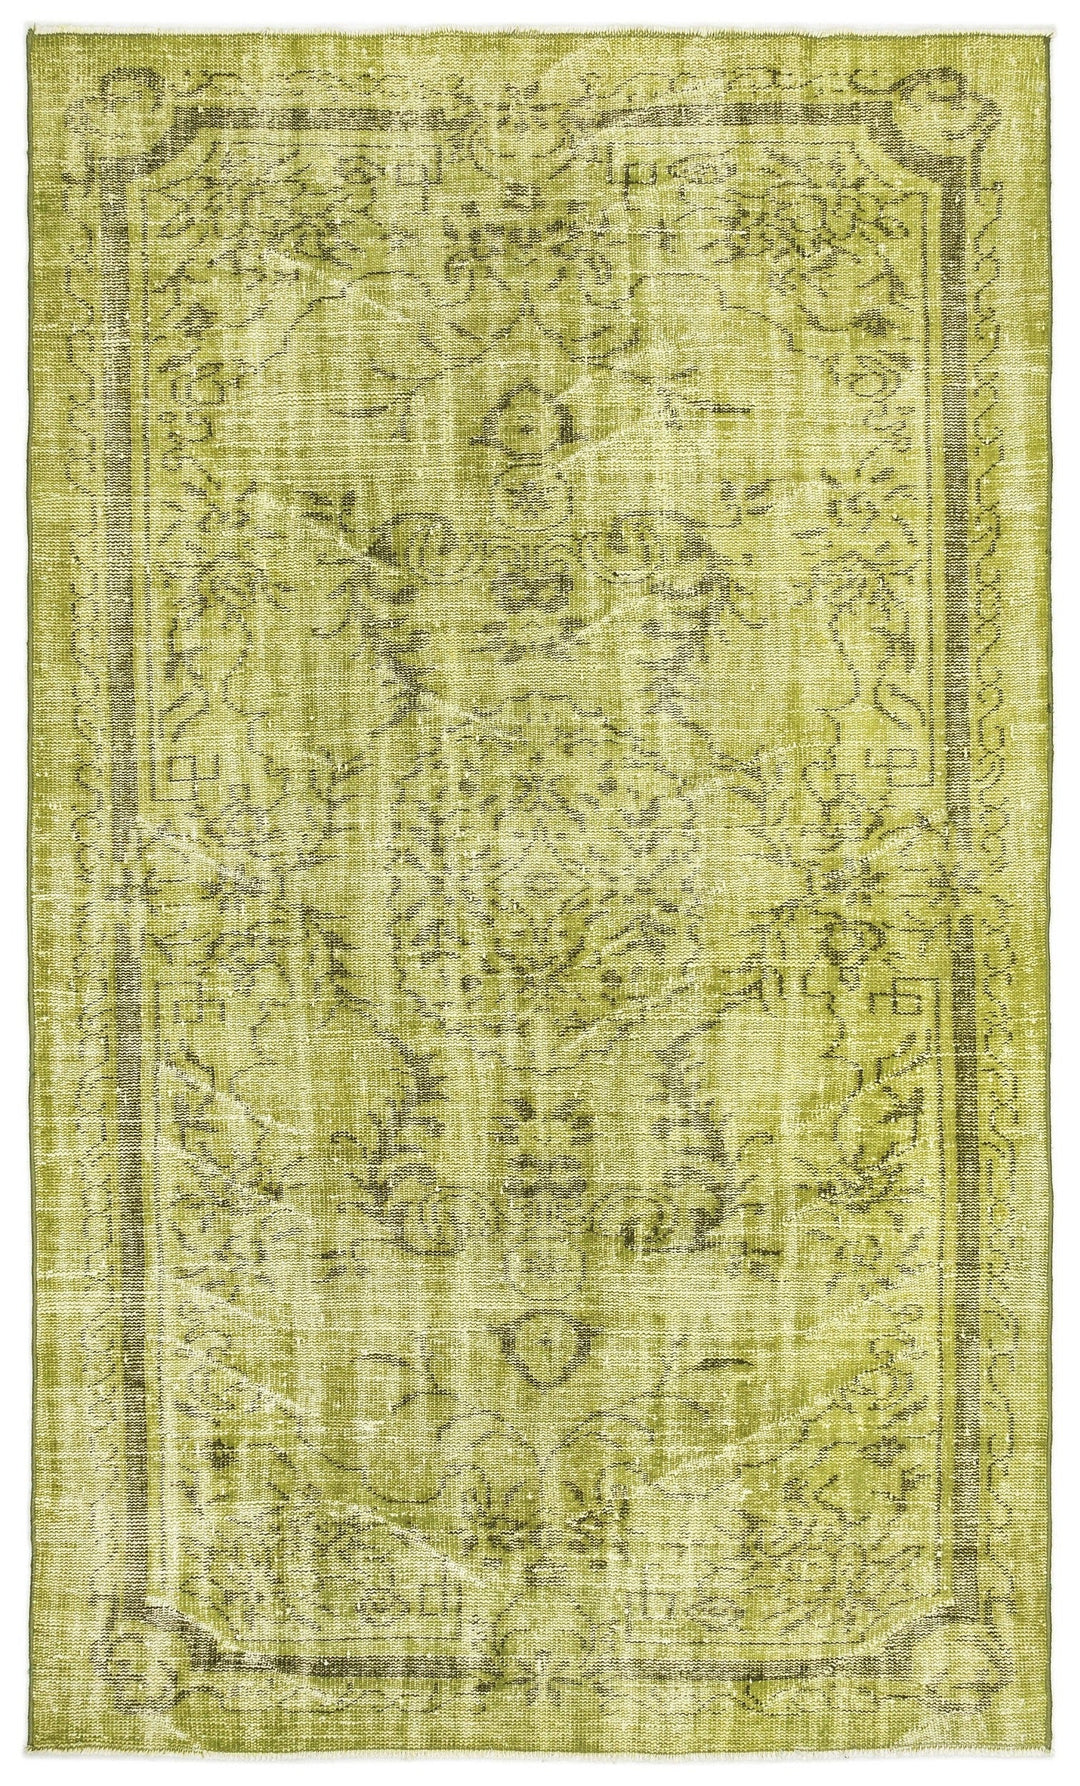 Athens Yellow Tumbled Wool Hand Woven Carpet 158 x 262